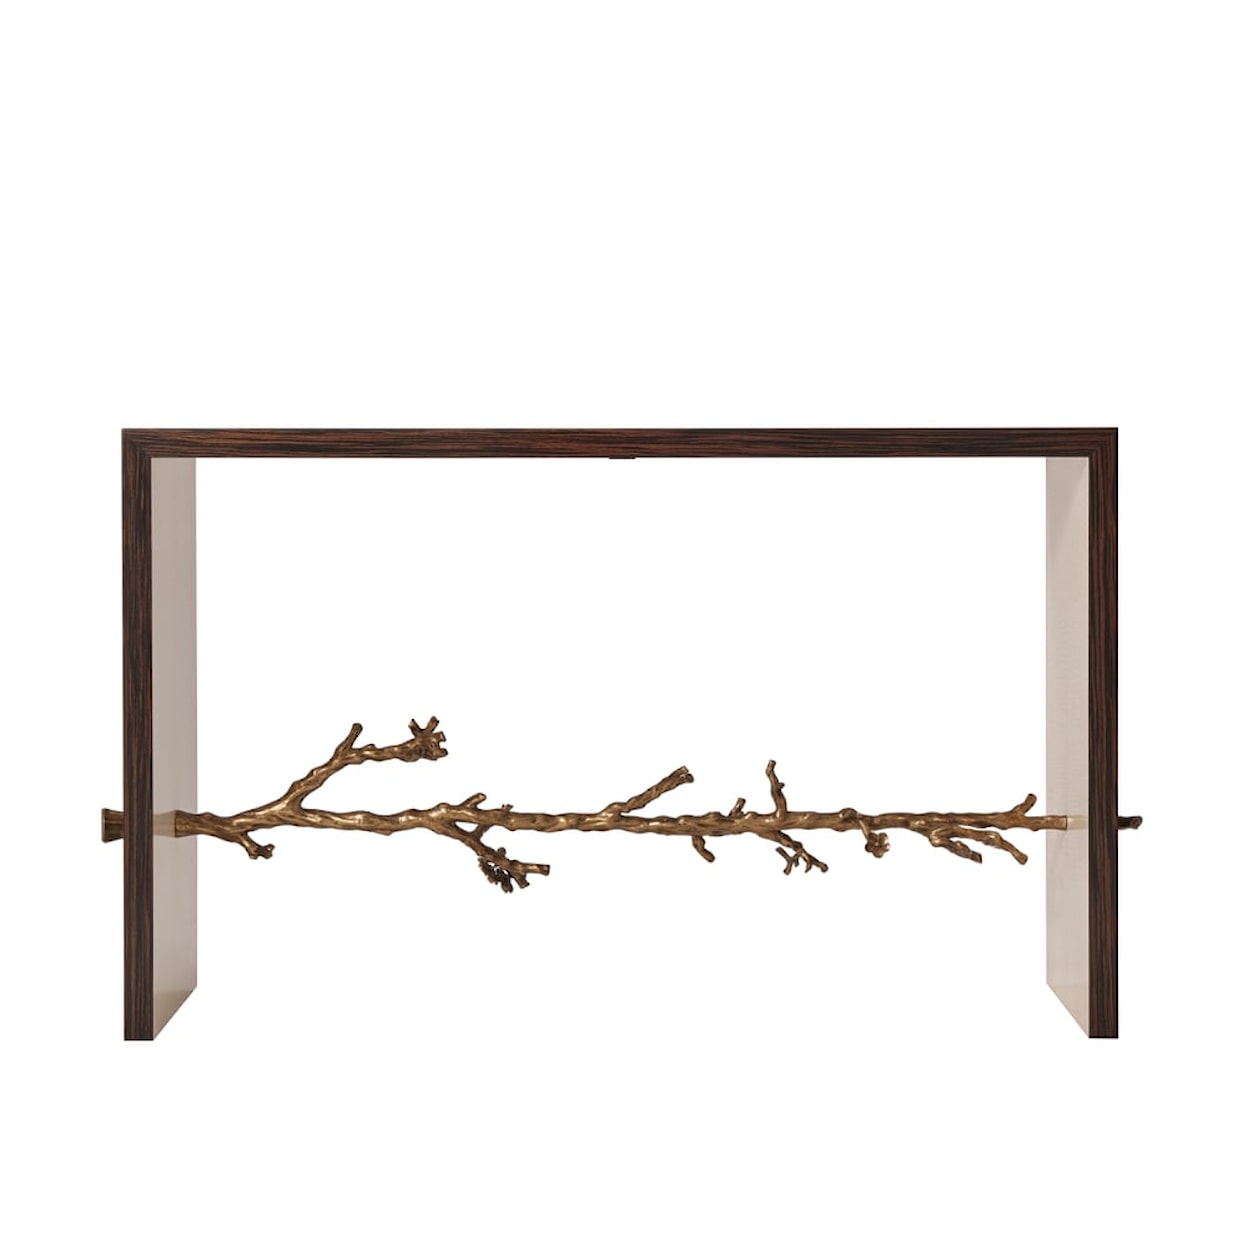 Theodore Alexander Anthony Cox SPRING CONSOLE TABLE